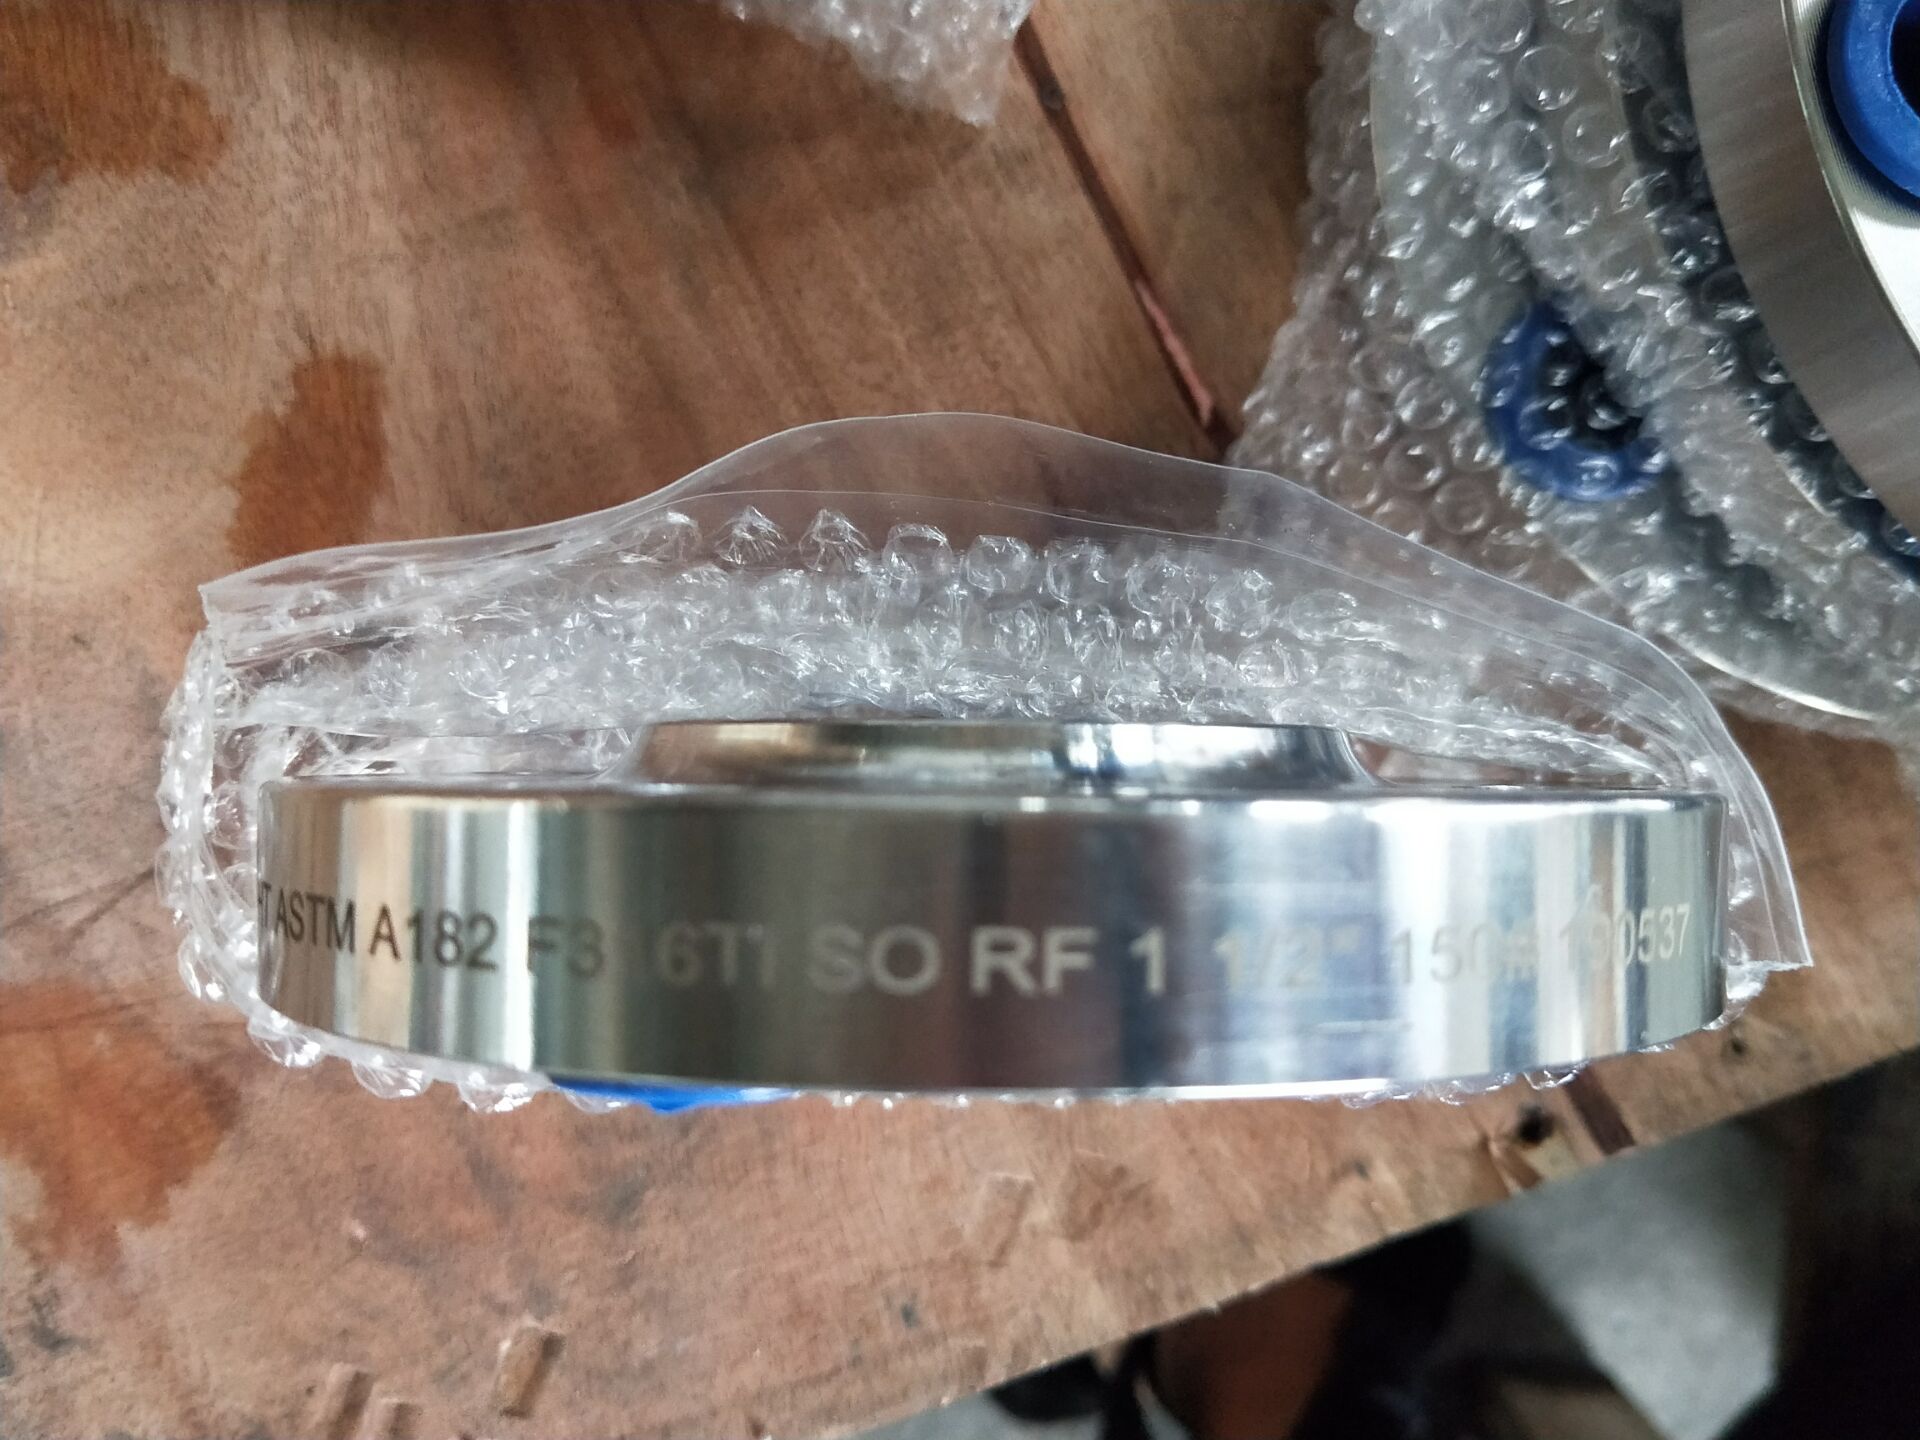 Stainless Steel 316Ti ASTM A182 UNS S31635 F316Ti  2INCH 4INCH  SO RF Flange Good Supplier